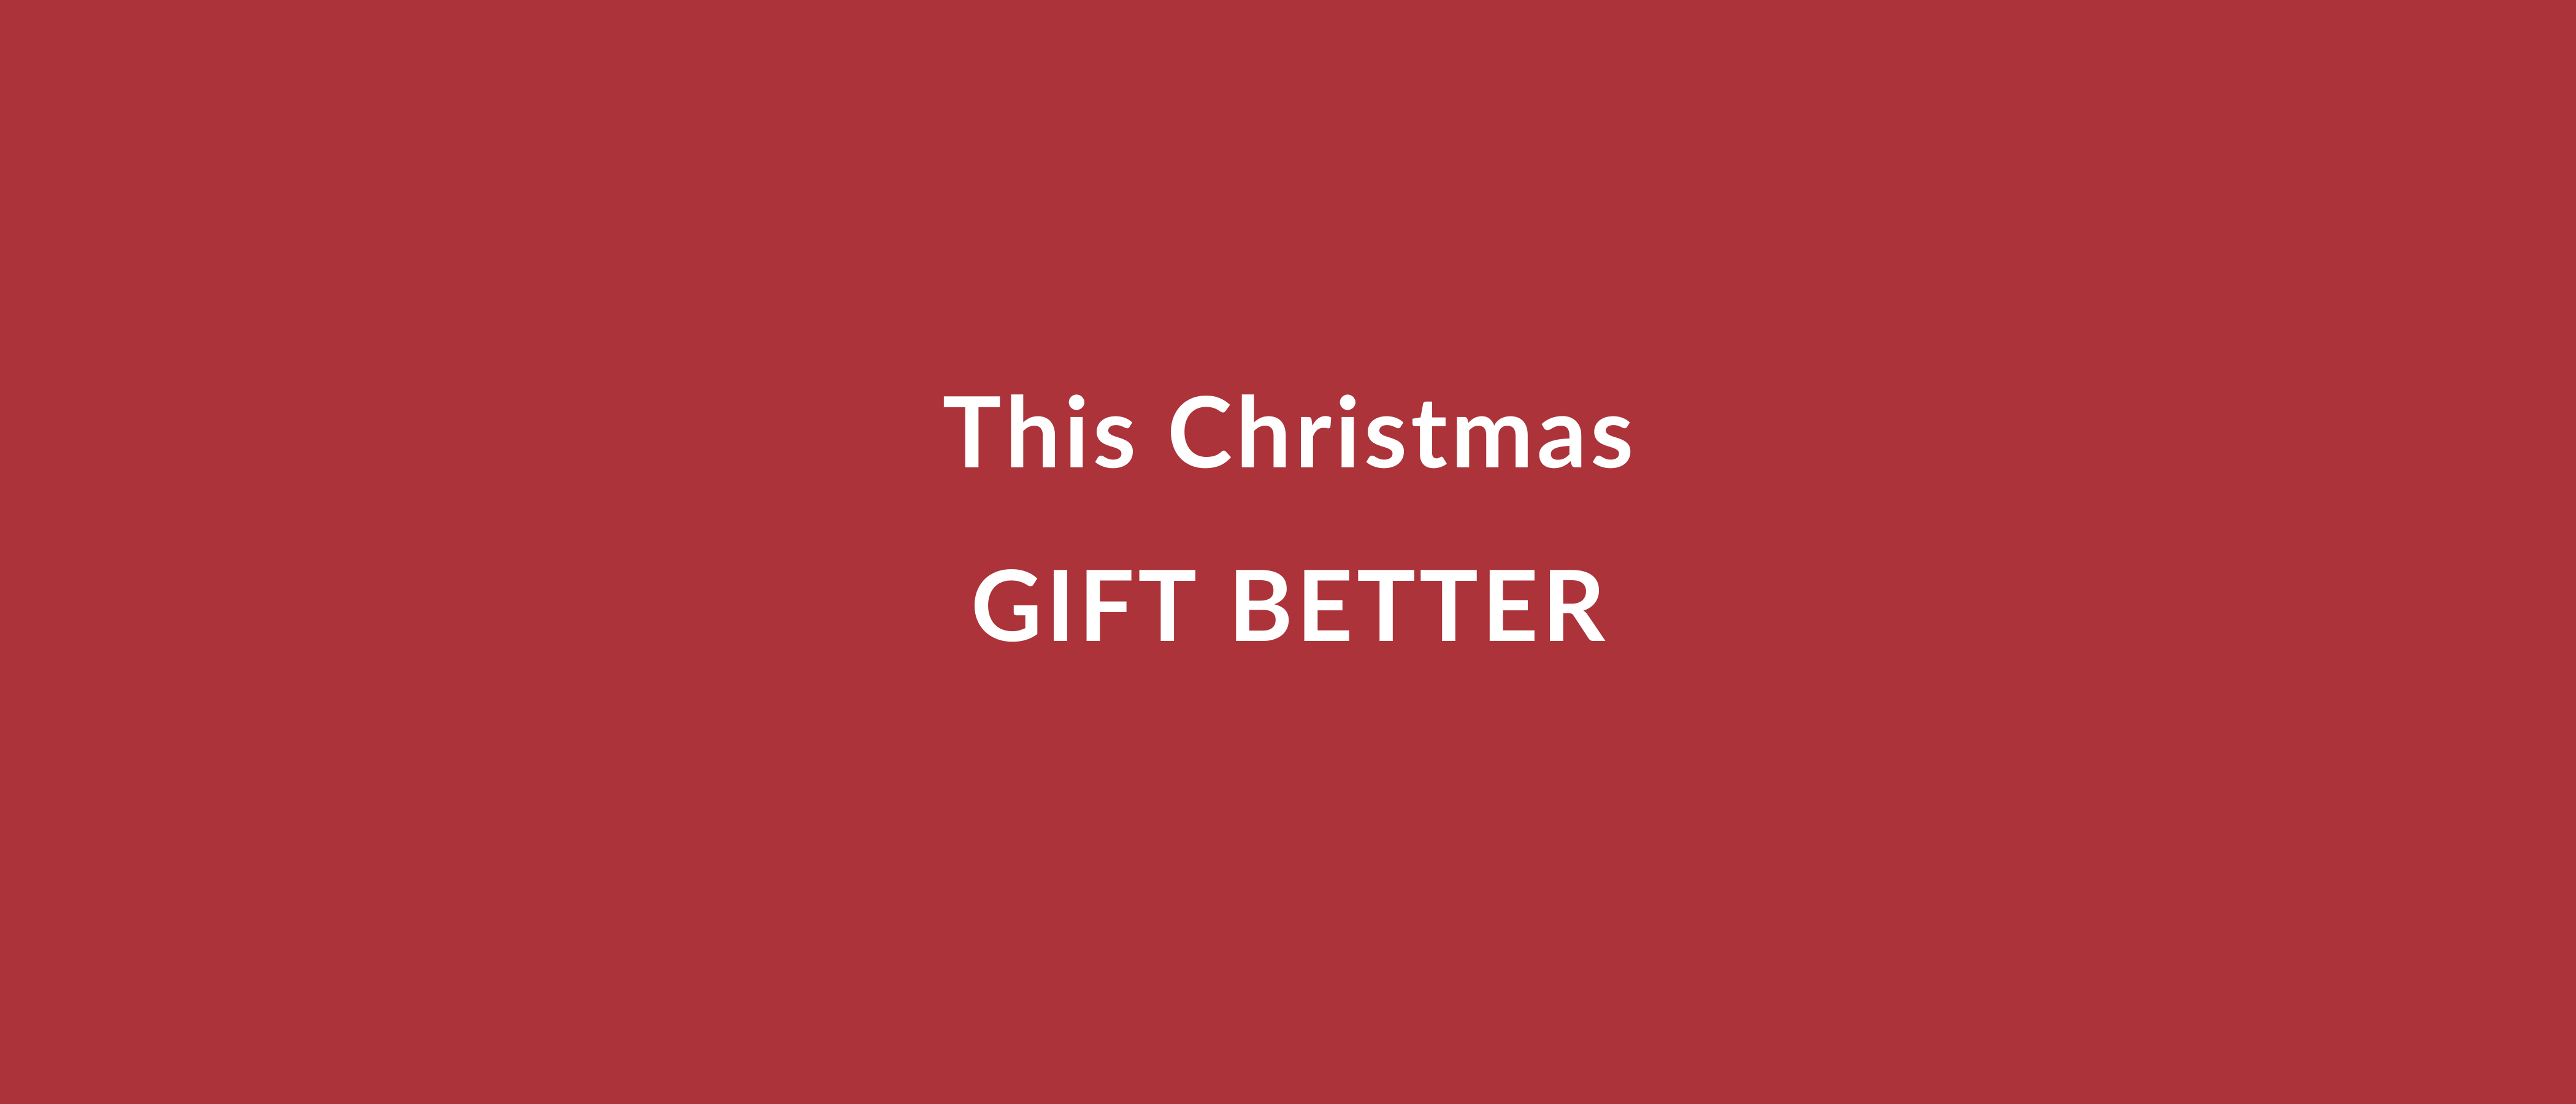 3 gifts we are gifting this Christmas